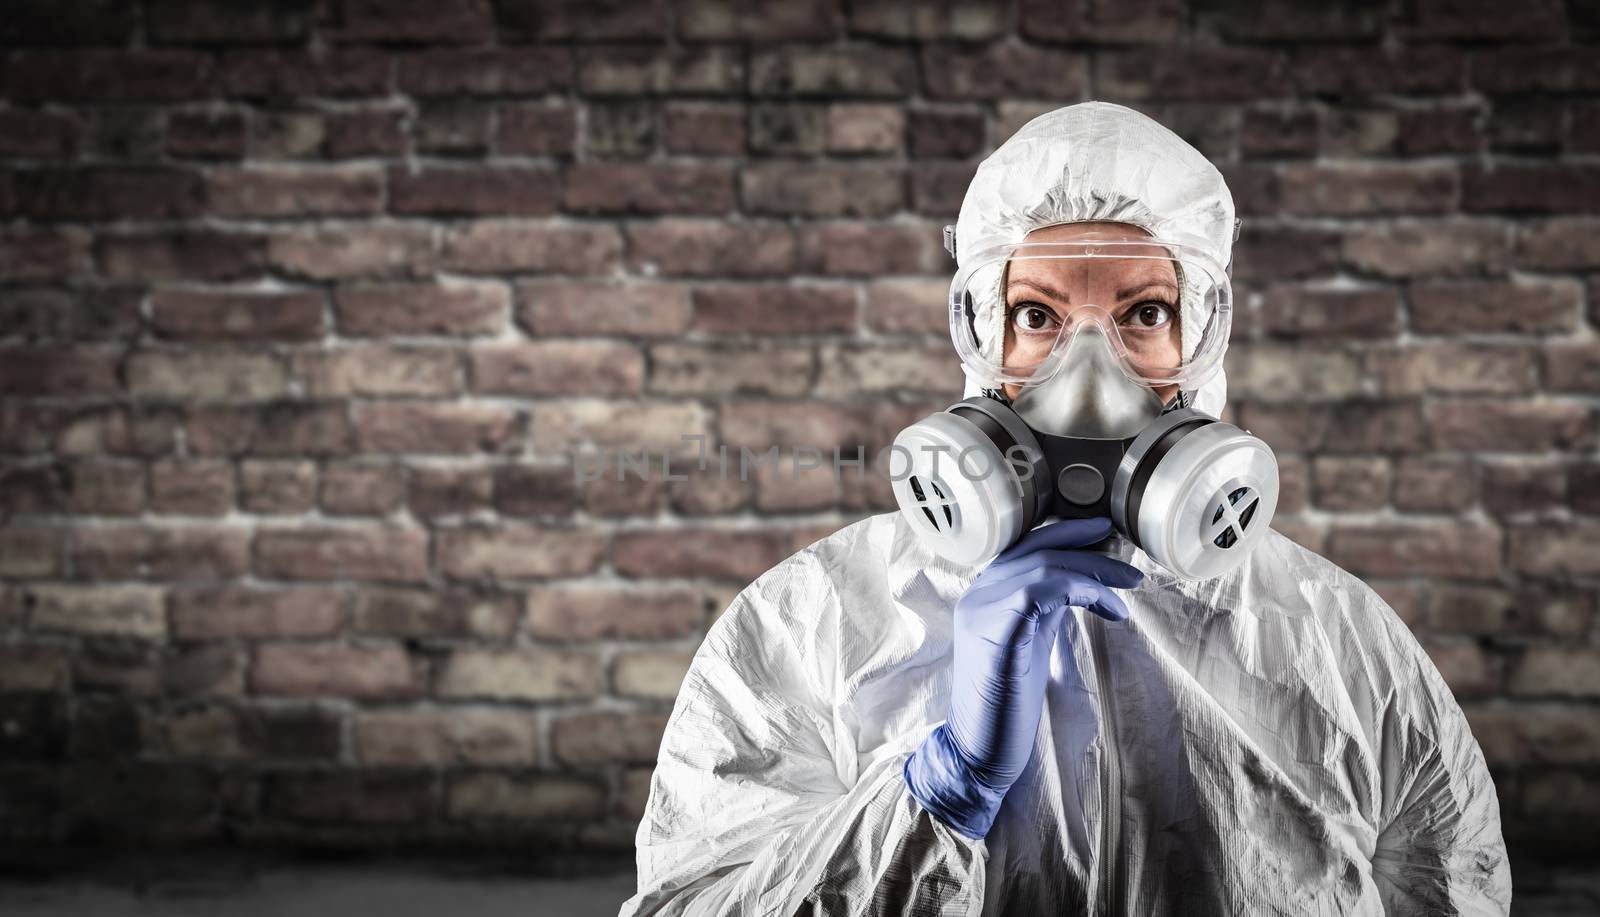 Woman Wearing Hazmat Suit, Protective Gas Mask and Goggles Against Brick Wall.